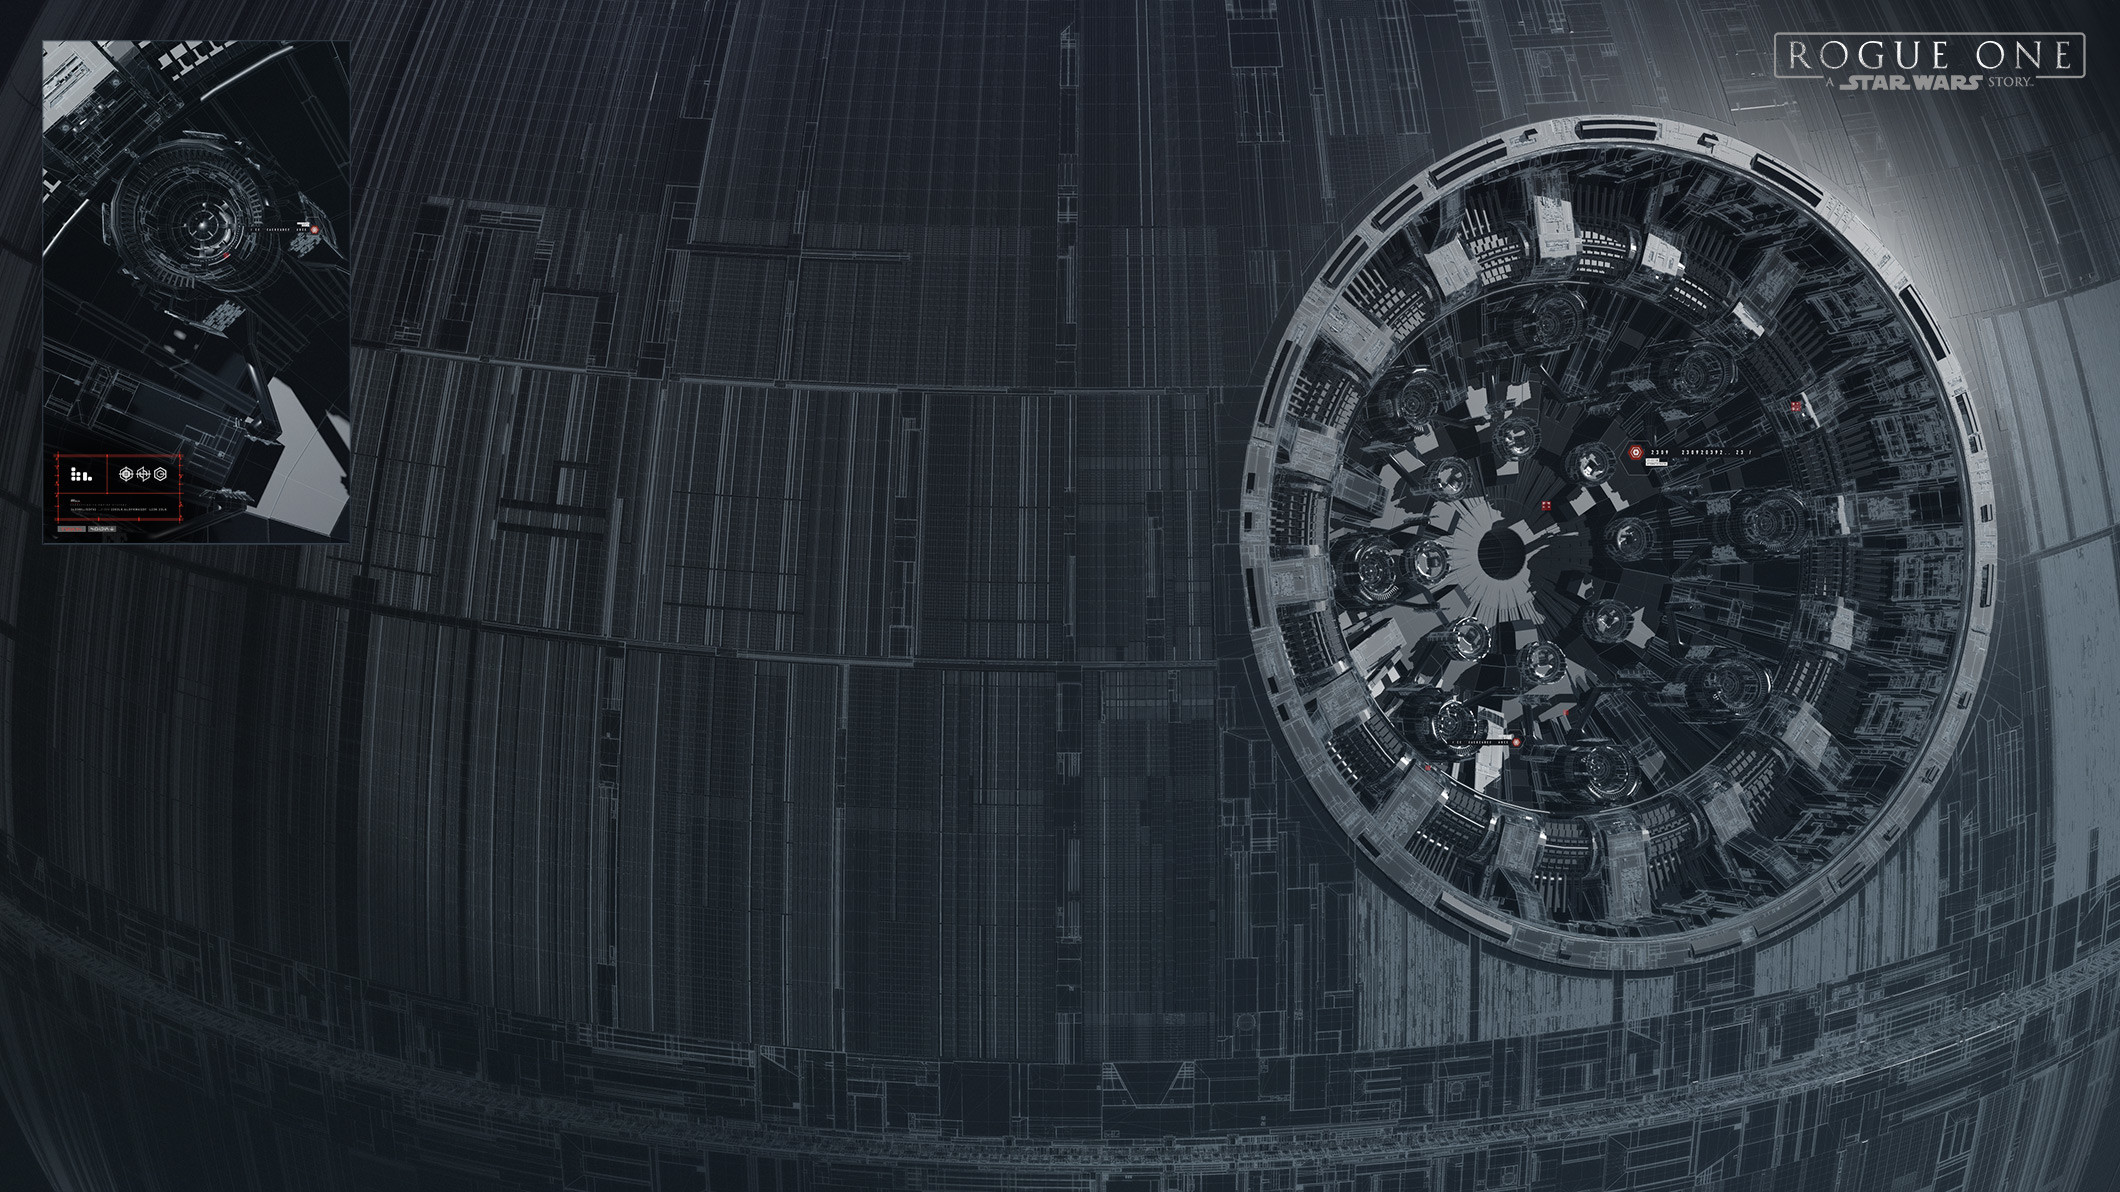 2120x1192 ... Rogue One Death Star Plans are Revealed